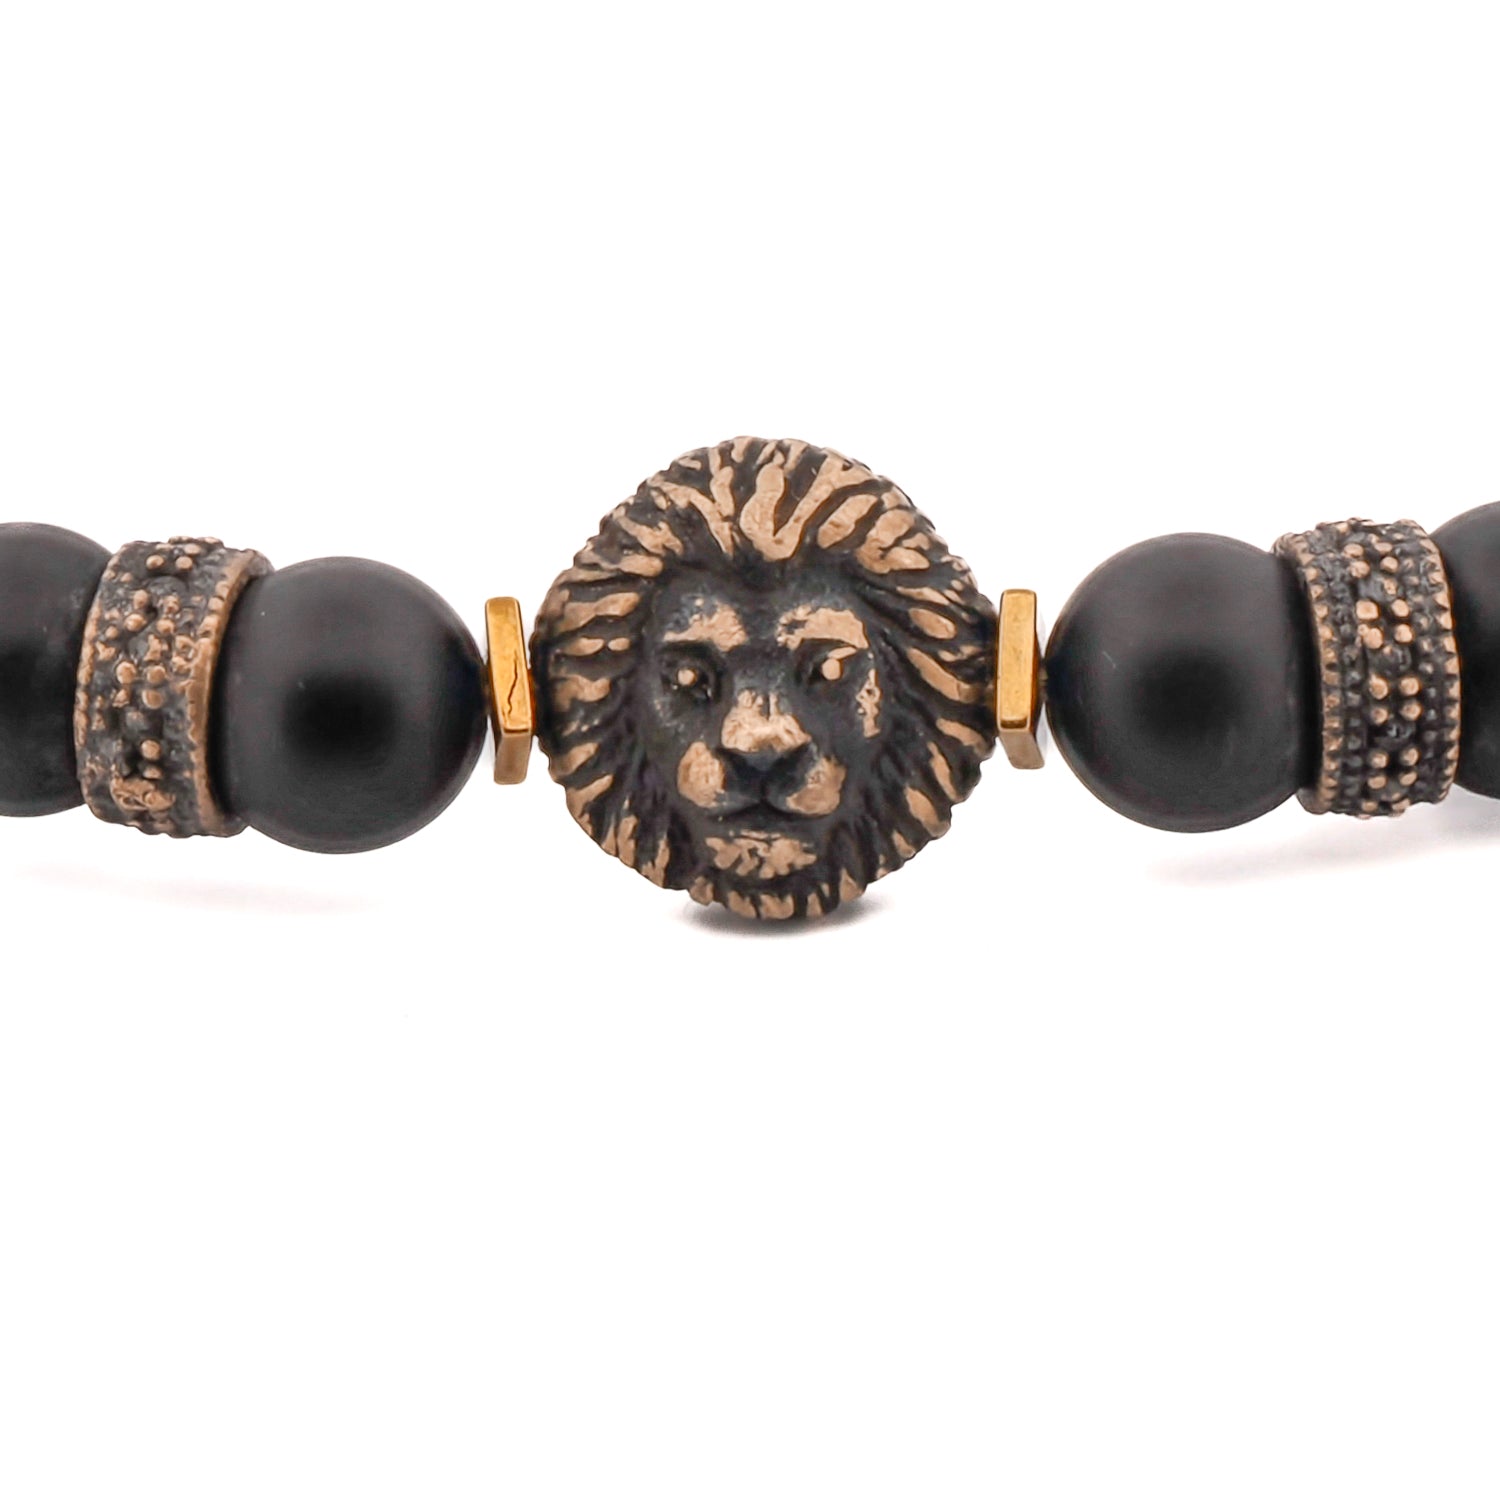 Stylish Black Onyx Stone Bracelet with a bronze king lion charm, perfect for special occasions or everyday wear